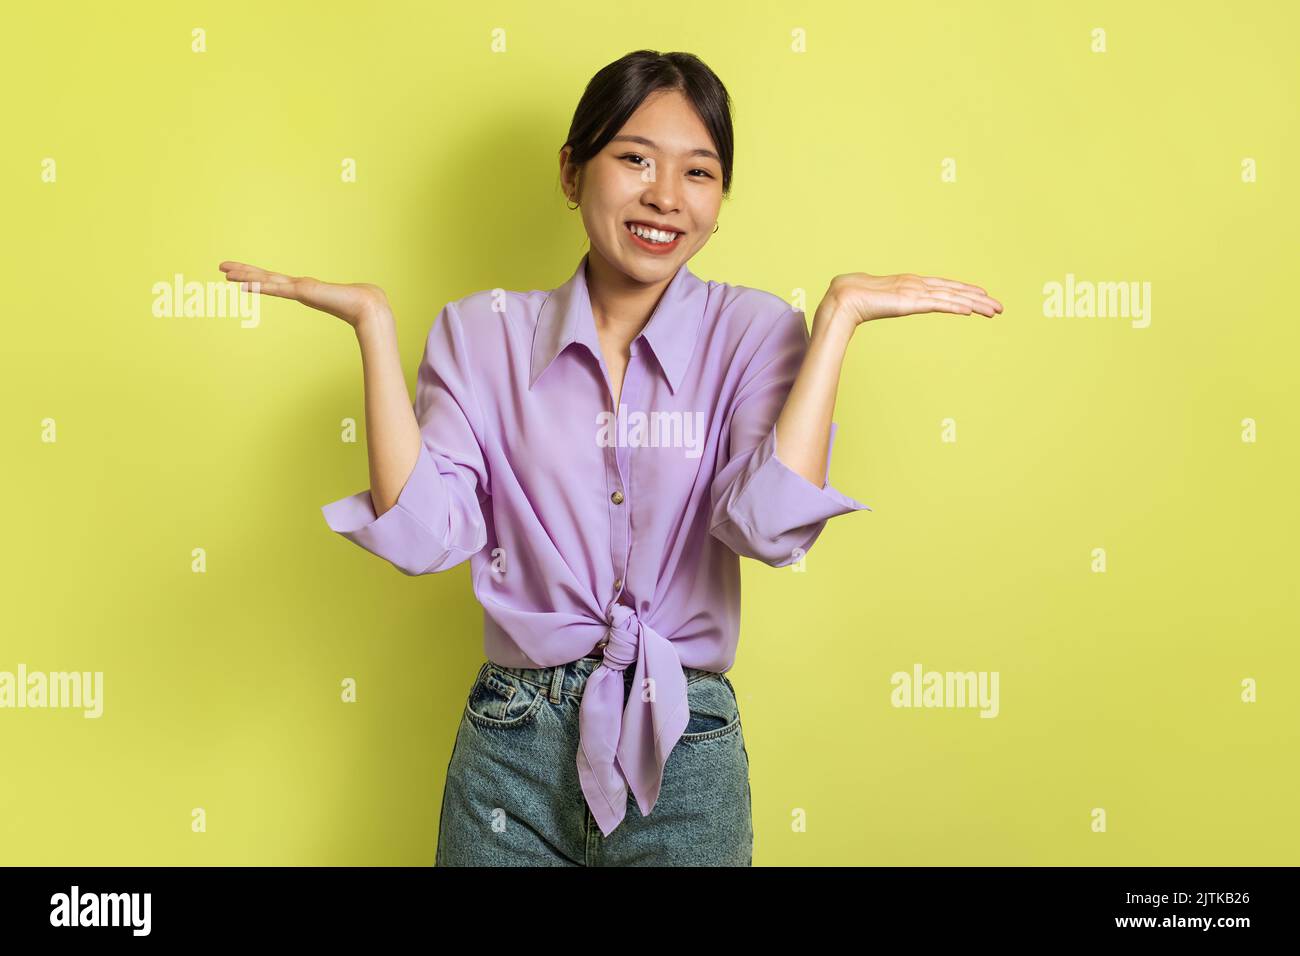 Asian Lady Shrugging Shoulders Smiling To Camera Over Yellow Background Stock Photo